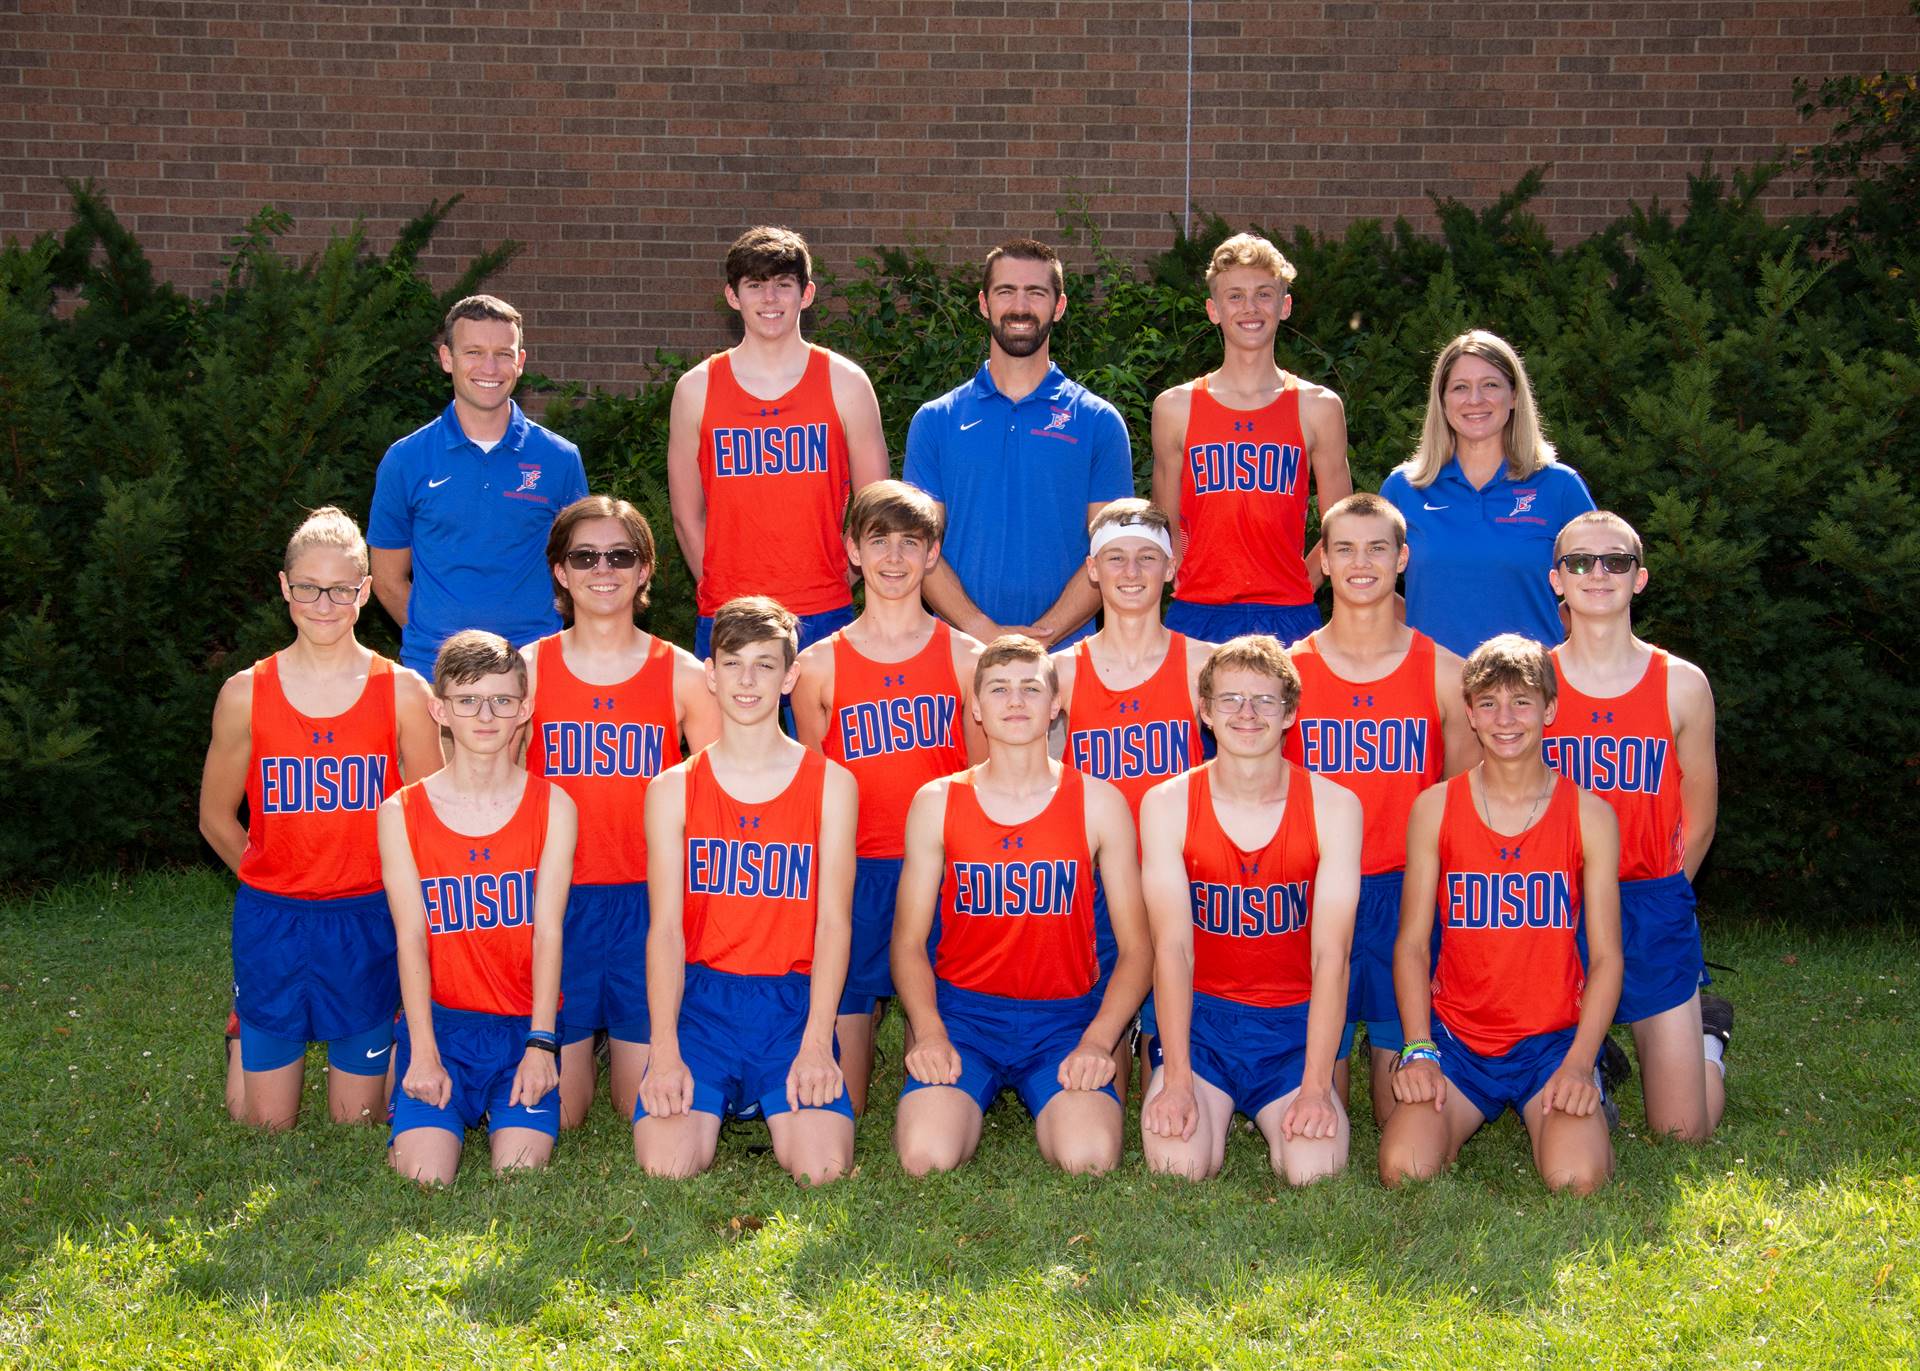 Charger Cross Country Team